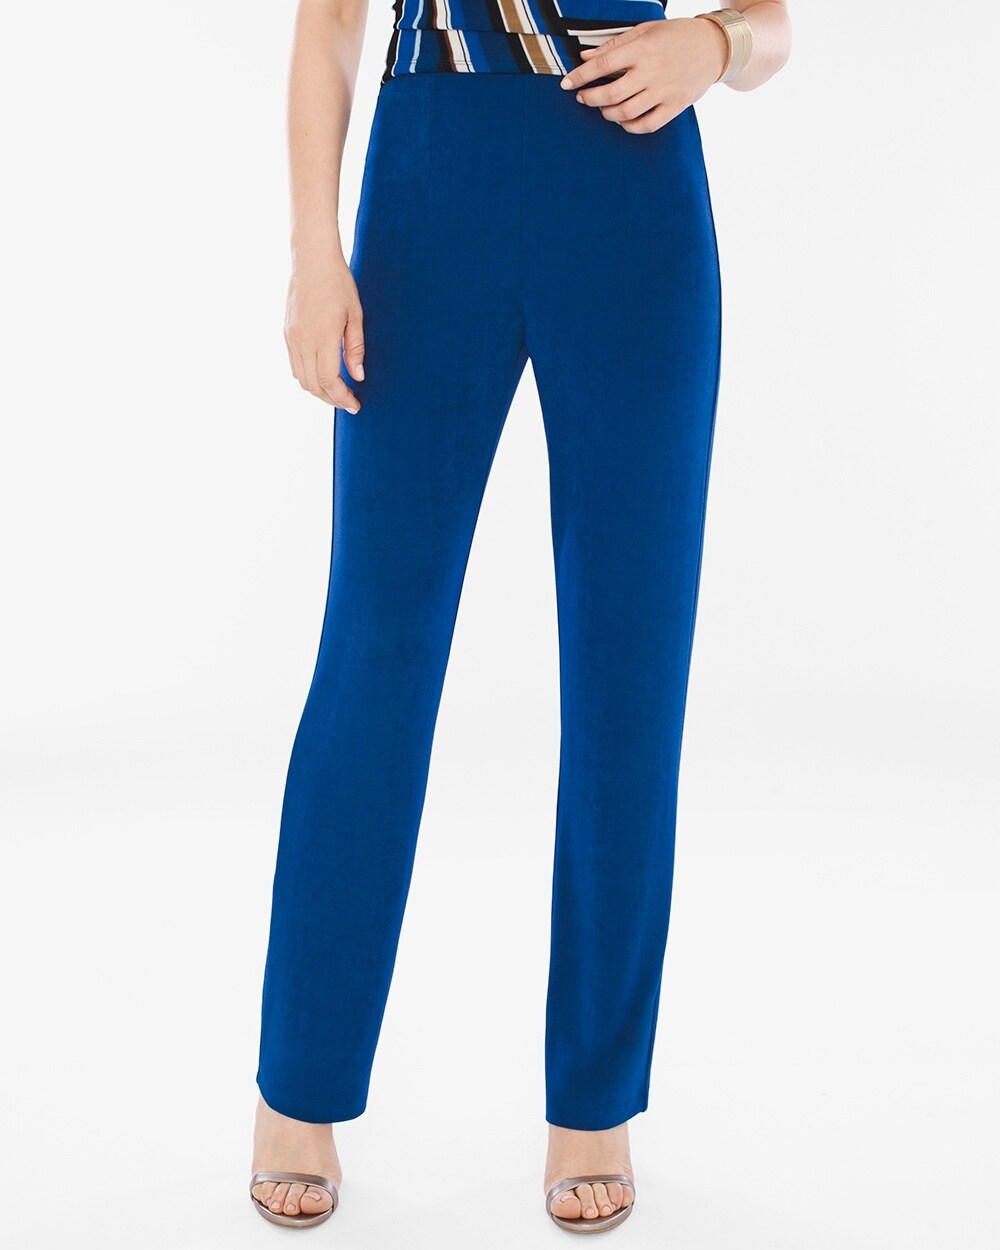 Travelers Classic No Tummy Pants in Royal Blue